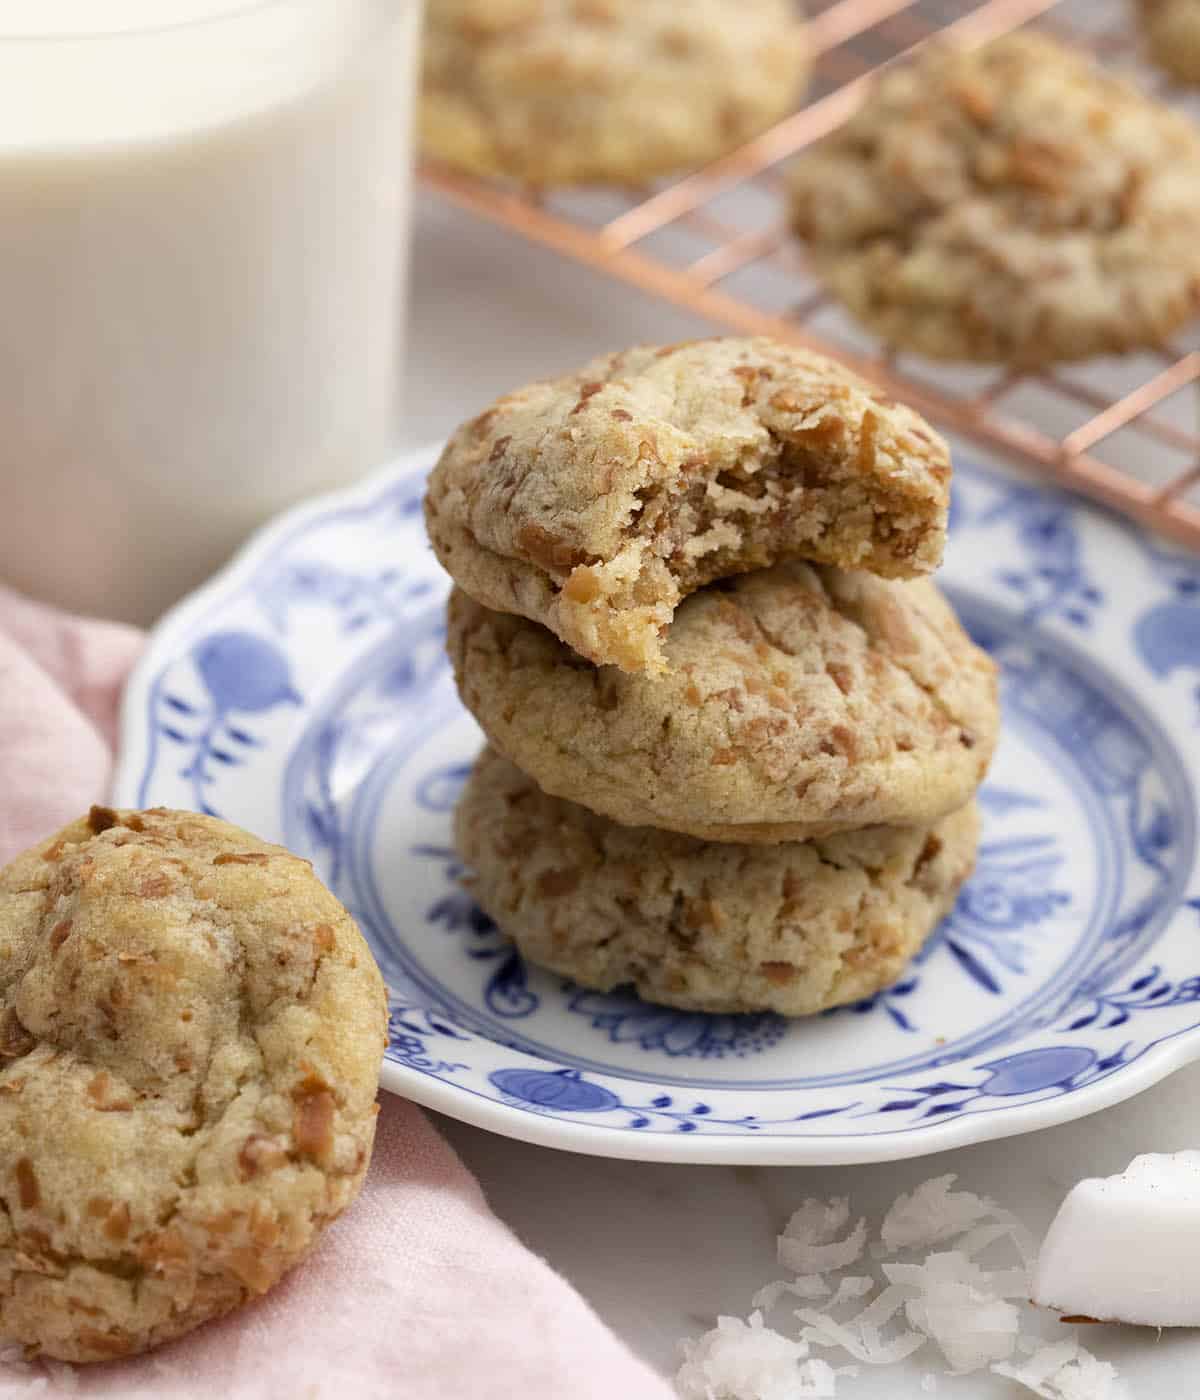 A stack of three coconut cookies on a plate. The top one has a bite taken out.